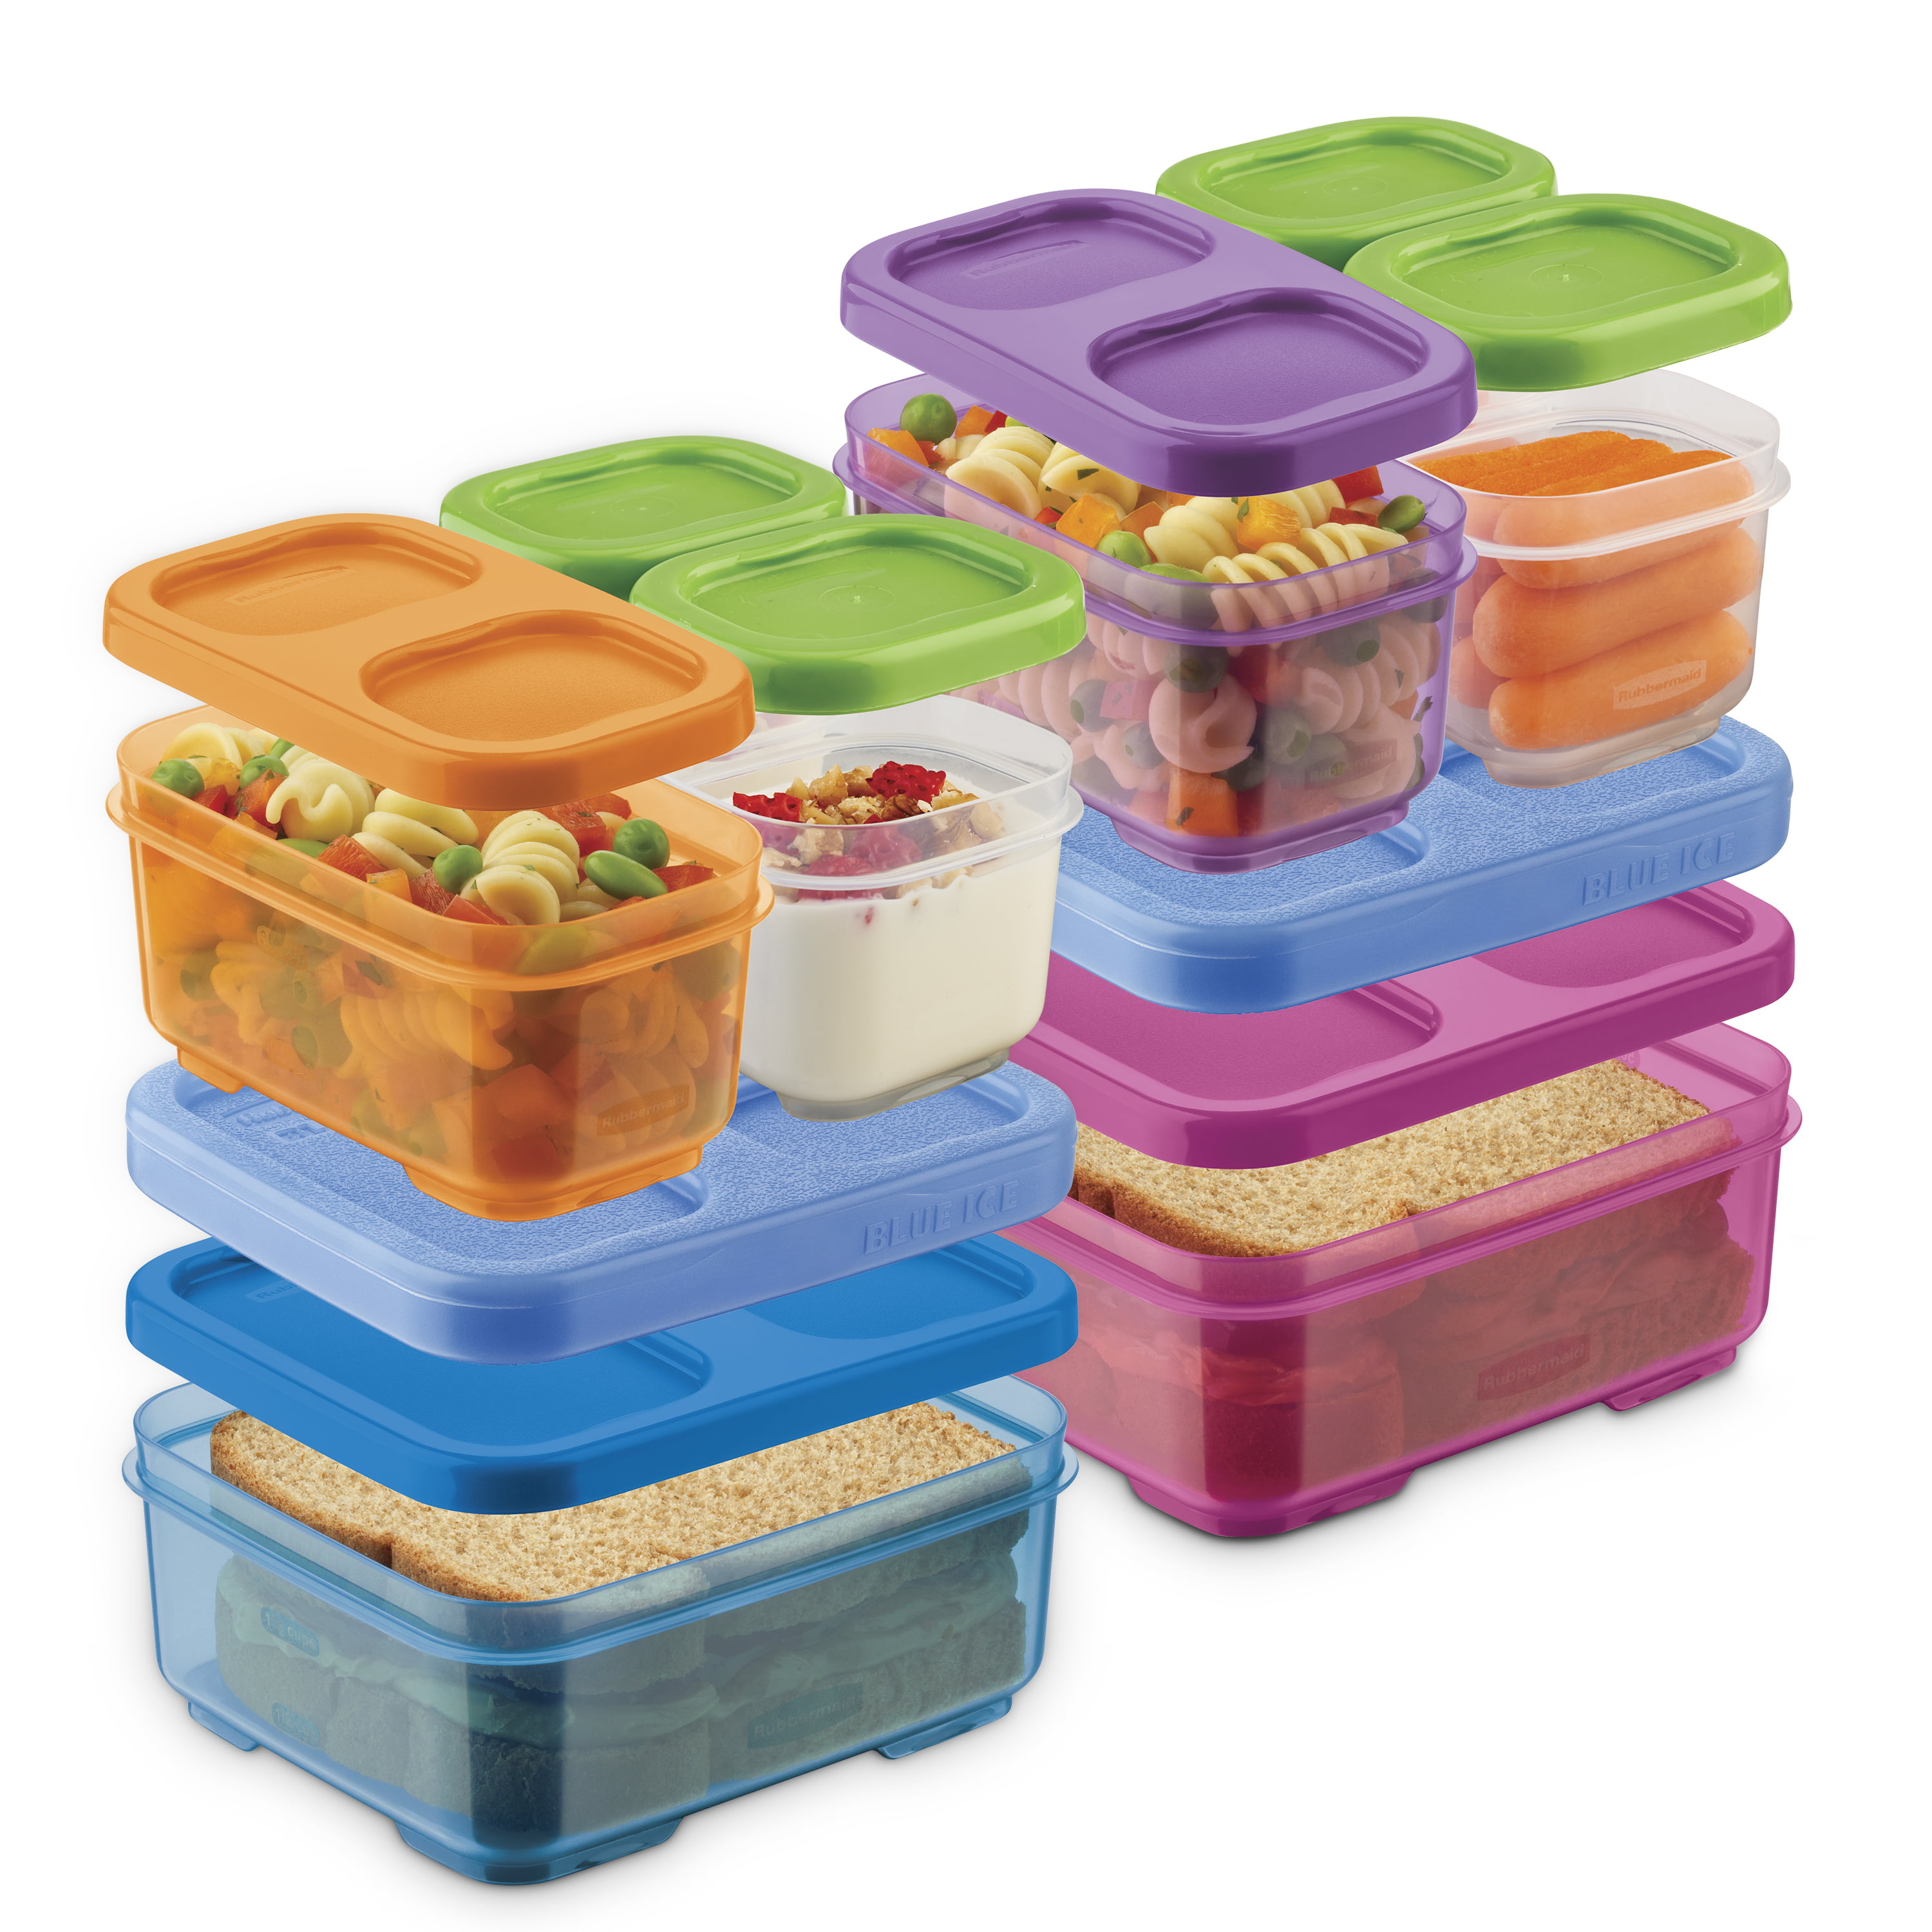 RubberMaid Balance 2 MEAL KITS Food Lunch Boxes Containers Kitchen Storage